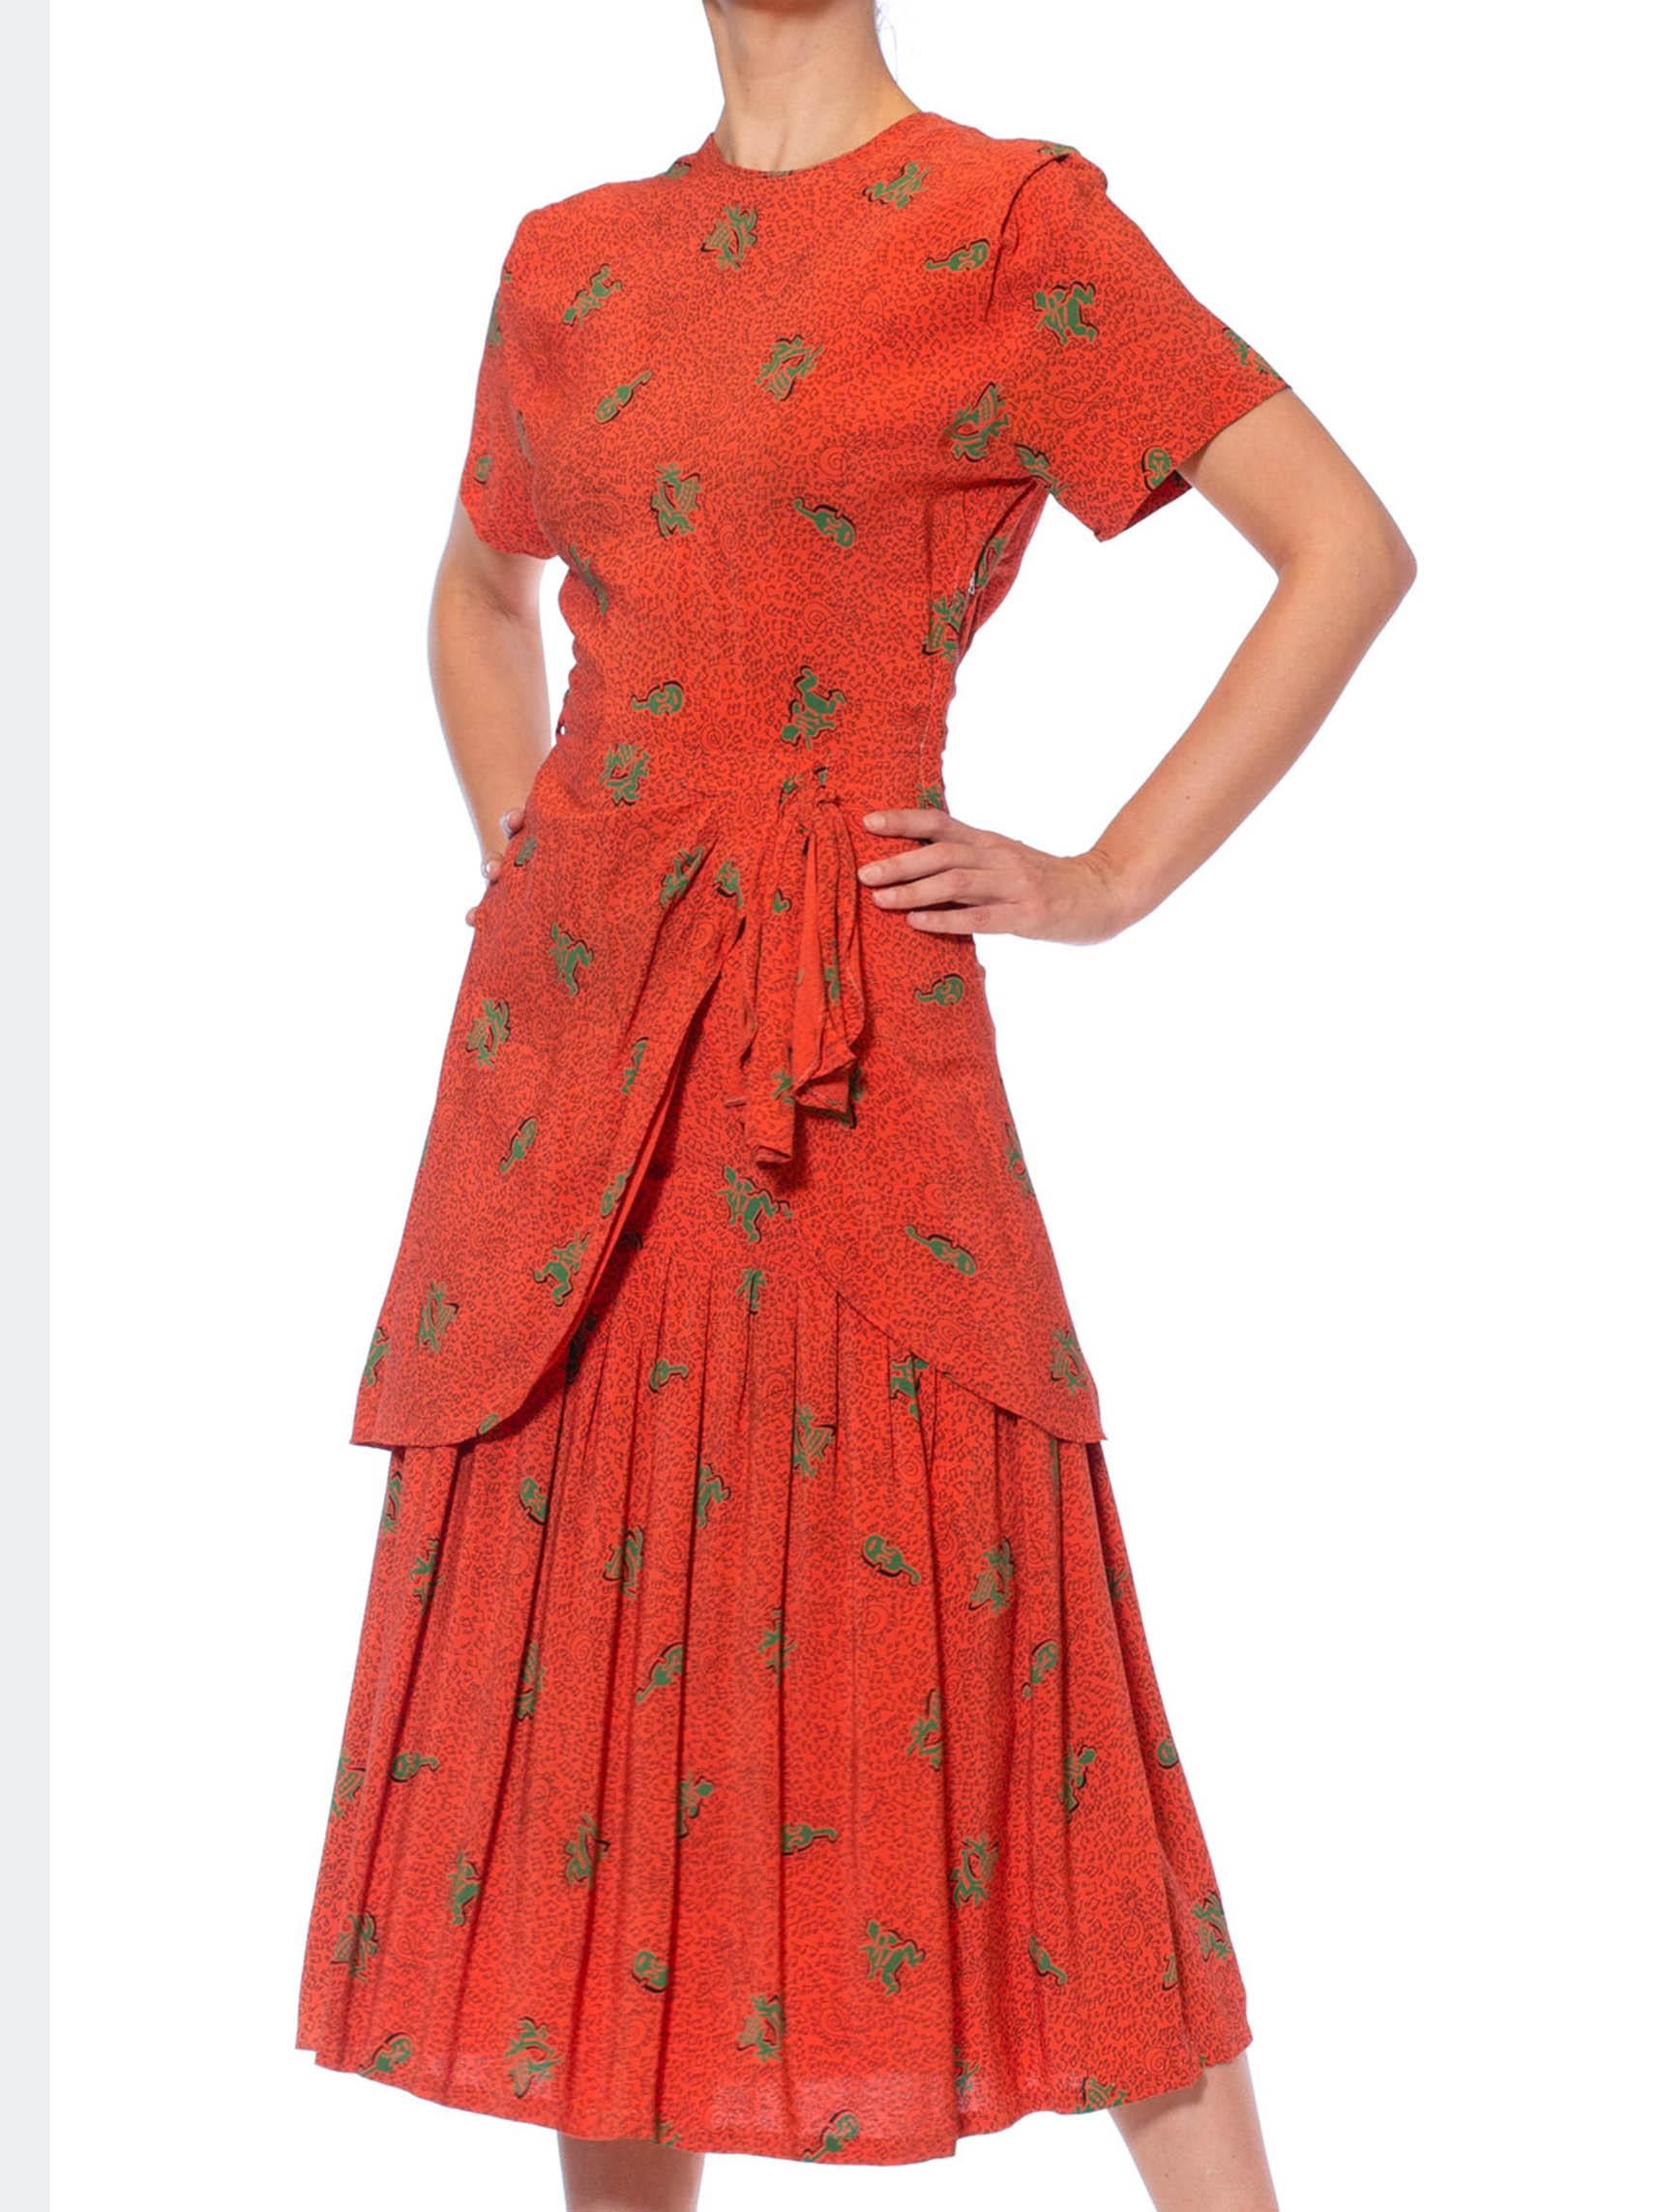 1940'S LORA LENOX Persimmon Red Rayon Crepe Rockabilly Lindy Hop Swing Dancer Music Note Print Dress